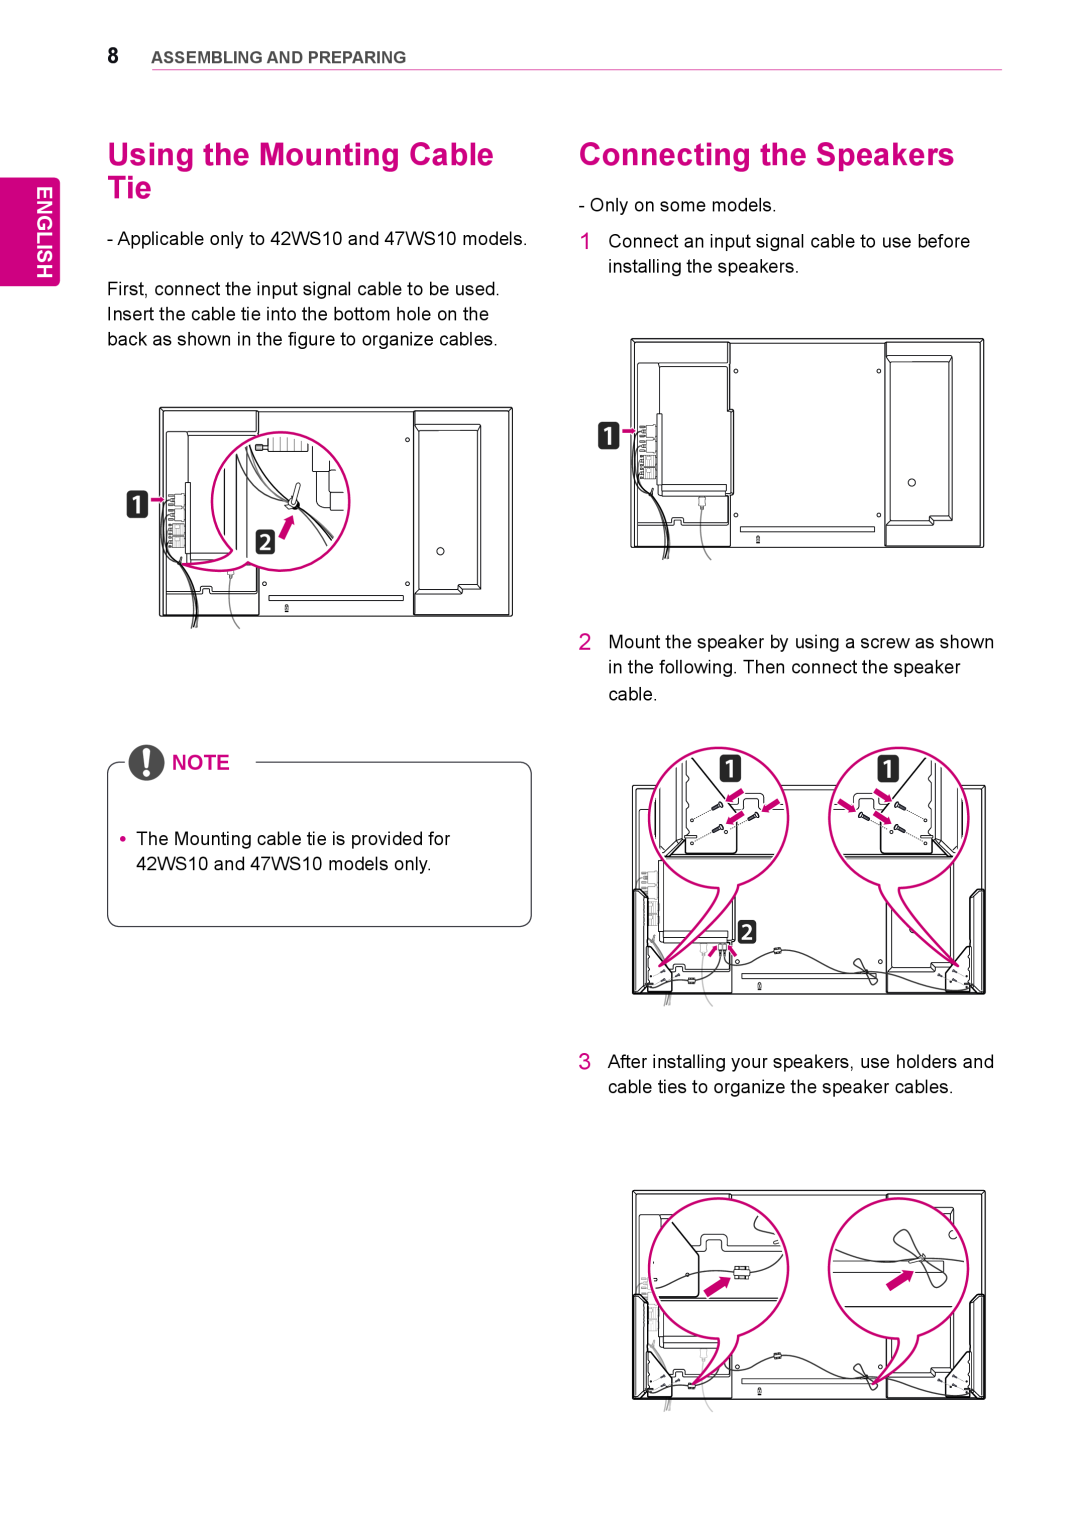 LG Electronics 55WS10, 42WS10, 47WS10 owner manual Using the Mounting Cable Tie, Connecting the Speakers, English 